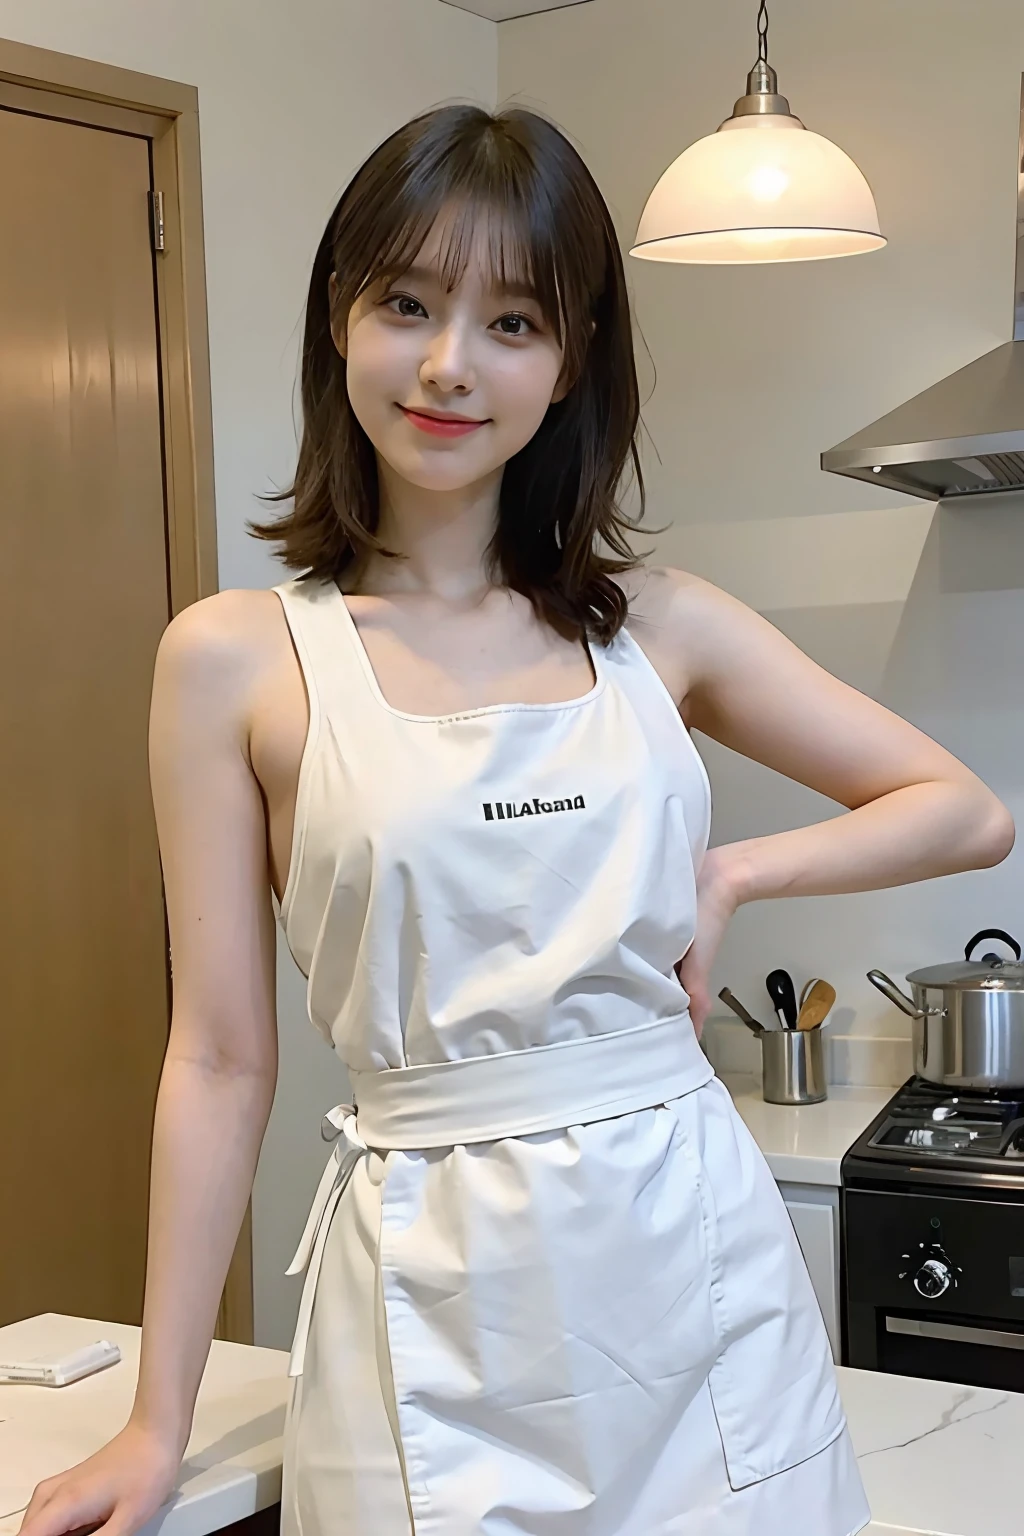 a woman is cooking、(kitchin_apron:1.Wear 3)、Good Hand、4K、hight resolution、​masterpiece、top-quality、cape:1.3、((Hasselblad photo))、Fine skin、sharp focus、(lighting like a movie)、Soft lighting、dynamic ungle、[:(Detailed face:1.2):0.2]、Medium chest、sweats streamed skin:1.2、(((In the kitchen))) A smile　Beautiful profile　Colossal tits　Beautiful body　Tying hair　Wide background々and a luxurious living room　Luxurious and luxurious living　Luxurious living room　Beautiful living room　Beautiful living room　A smile　an orange　lemons　A smile　Laughing　banana in　pineapple　Luxurious room　beautiful  lighting　Beautiful lighting　Very large room　very high image quality　very high res　8k Photos　Viewer's Perspective　Very gorgeous kitchen　Luxury Kitchen　white tank tops　White apron　Millionaire Kitch